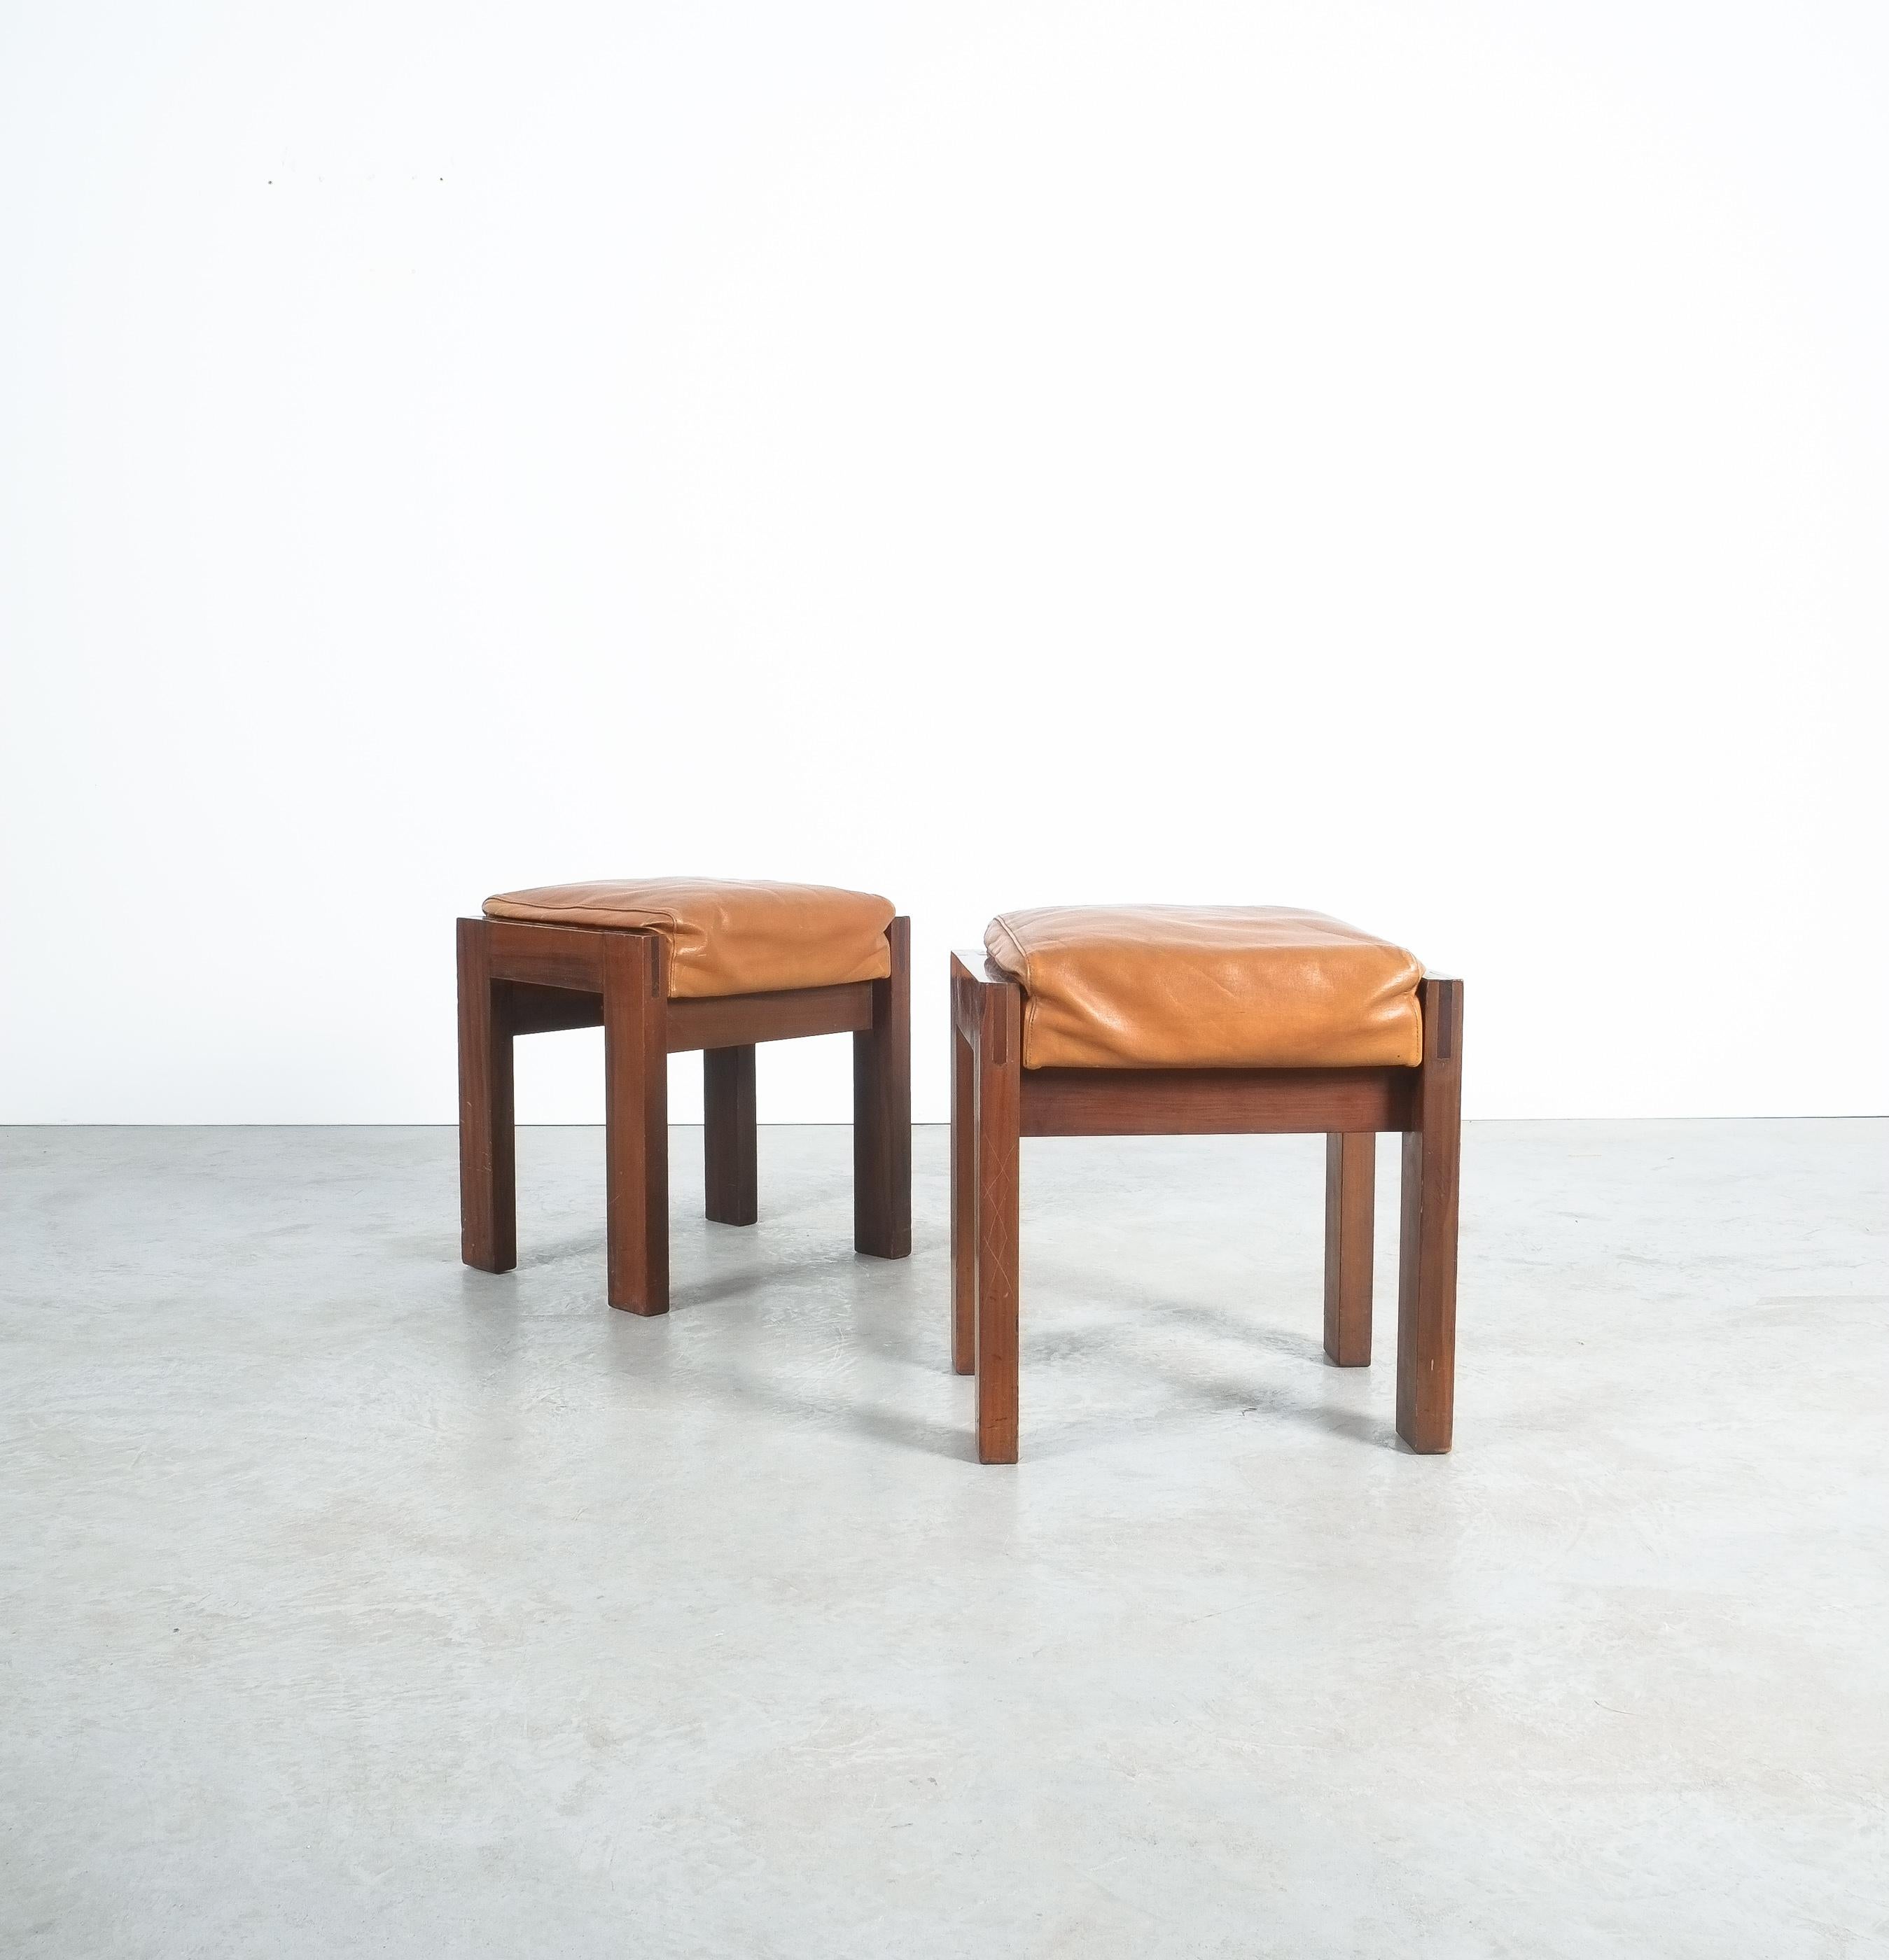 Maple and Leather Midcentury Wood Stools, Italy, 1950 For Sale 2